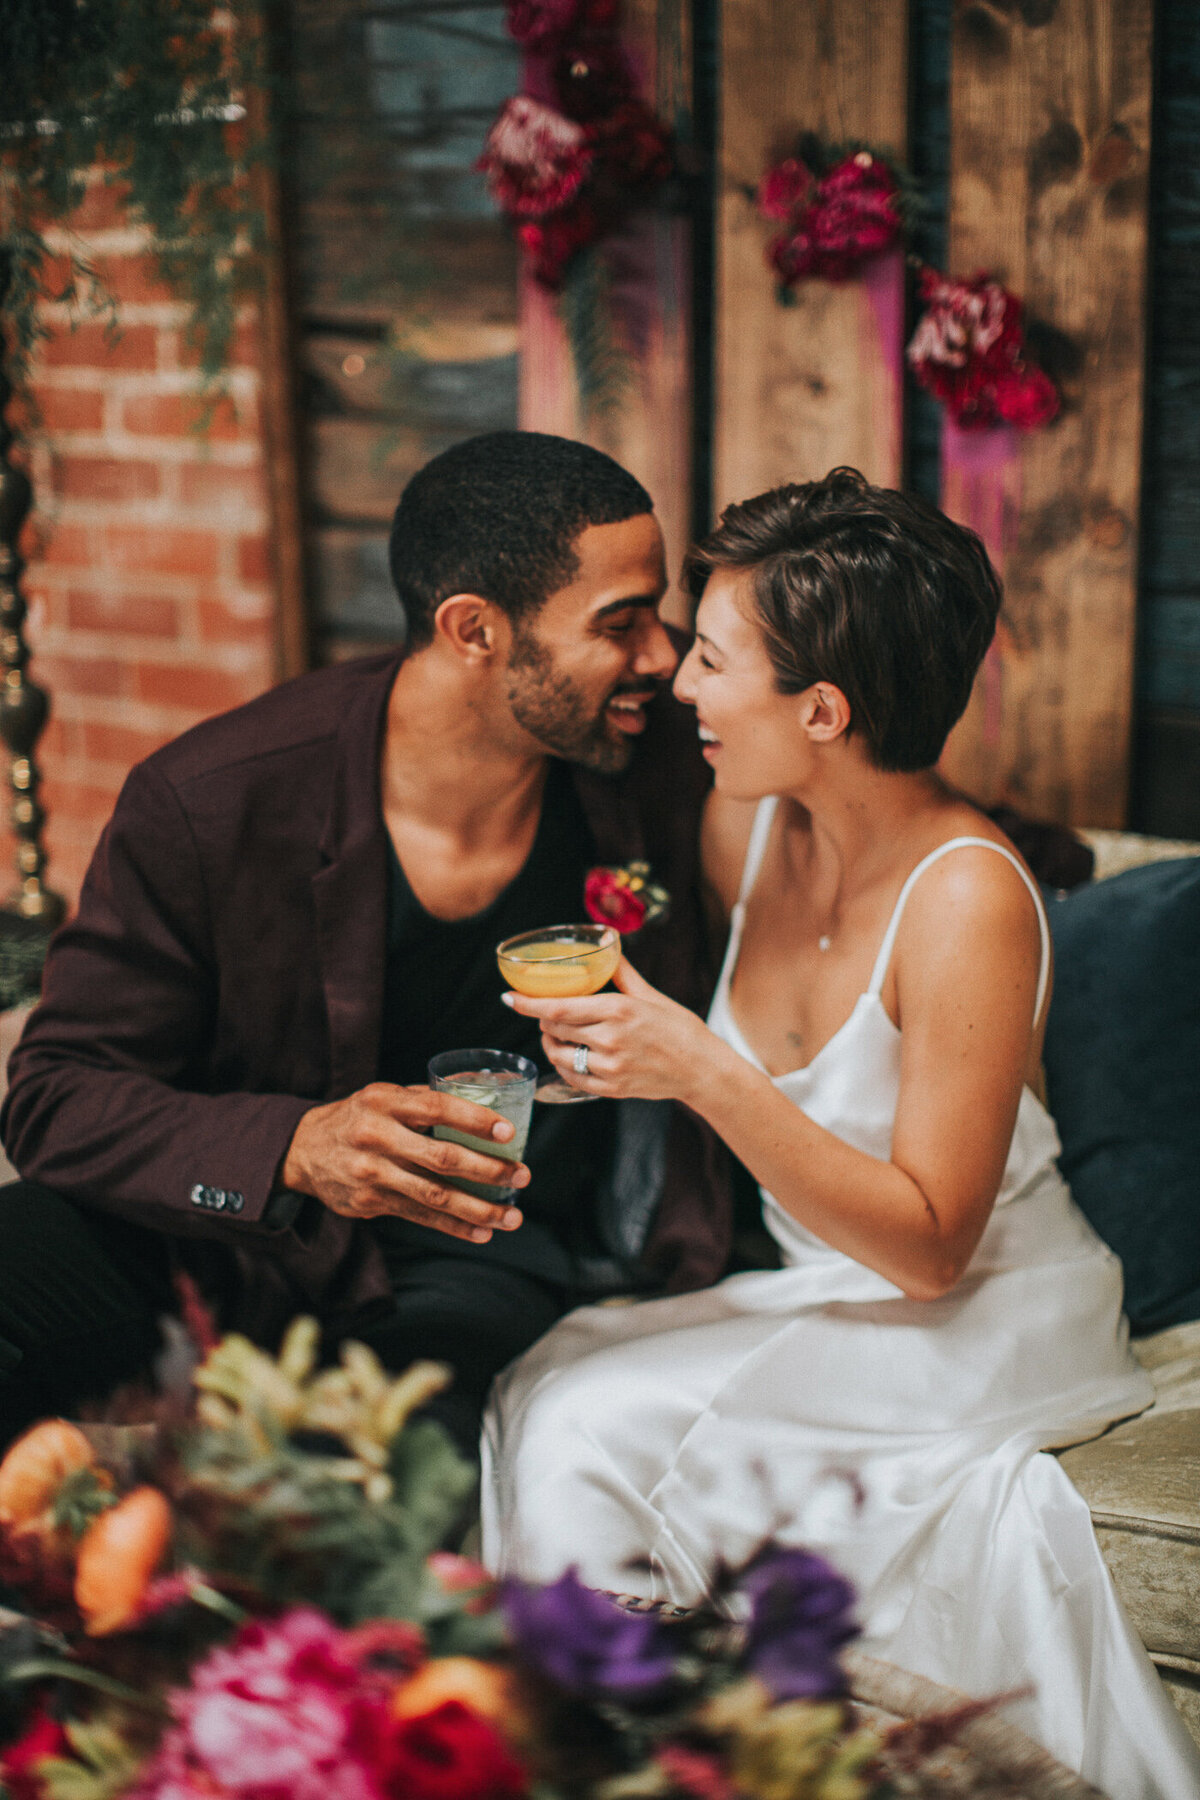 Bride and groom toast to their wedding while nuzzling on a sofa surrounded by flowers